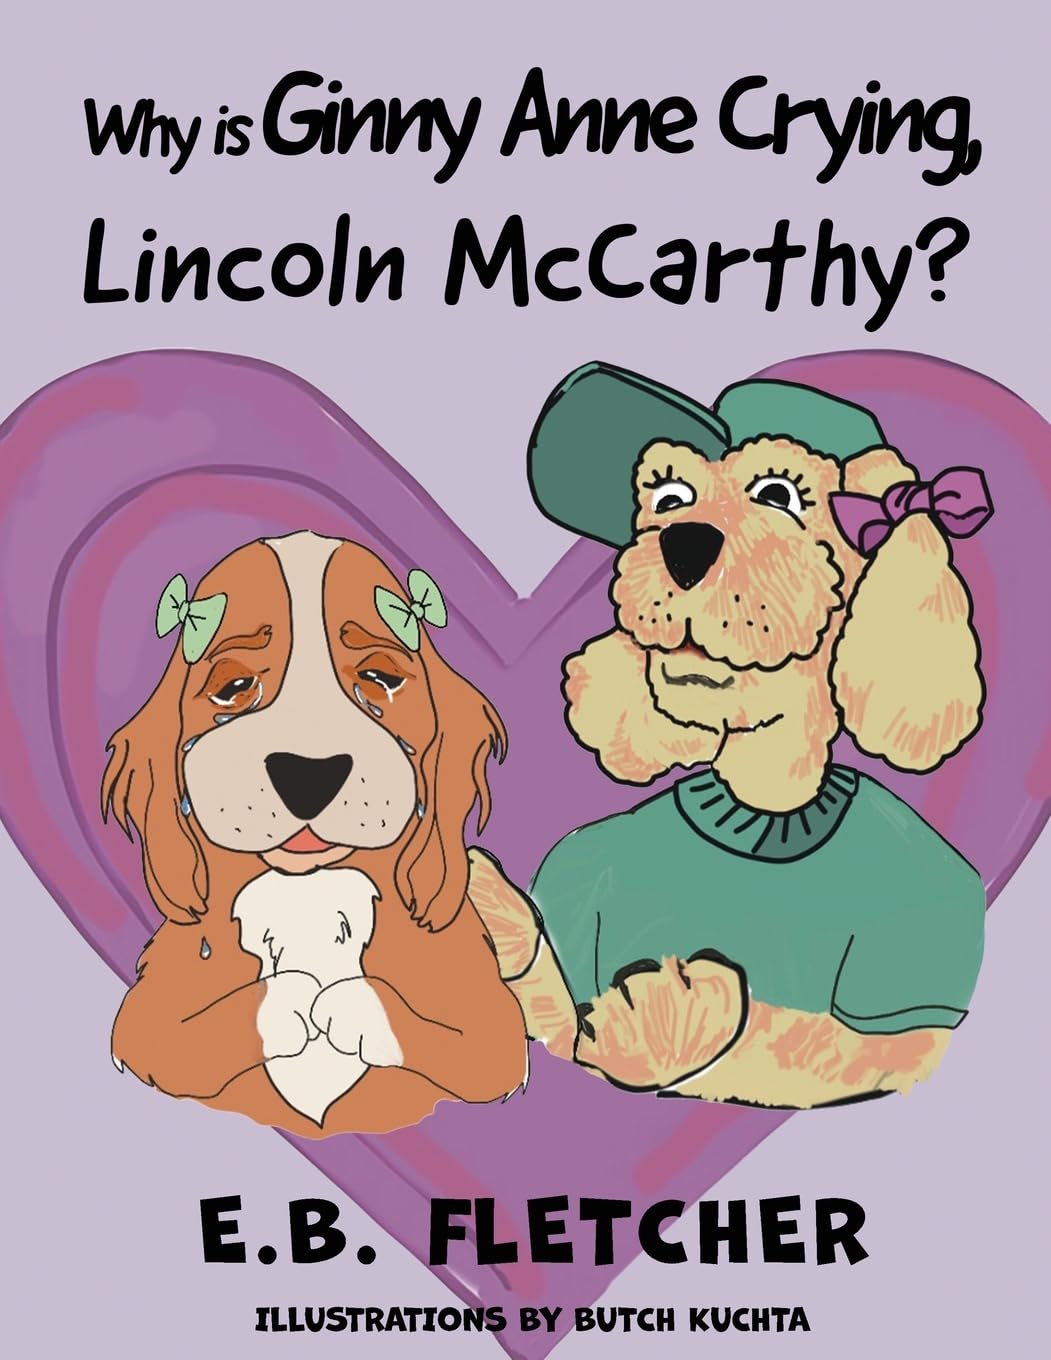 Author's Tranquility Press Announces the Release of "Why Is Ginny Anne Crying, Lincoln McCarthy?" by E.B. Fletcher and Illustrated by Butch Kutcha